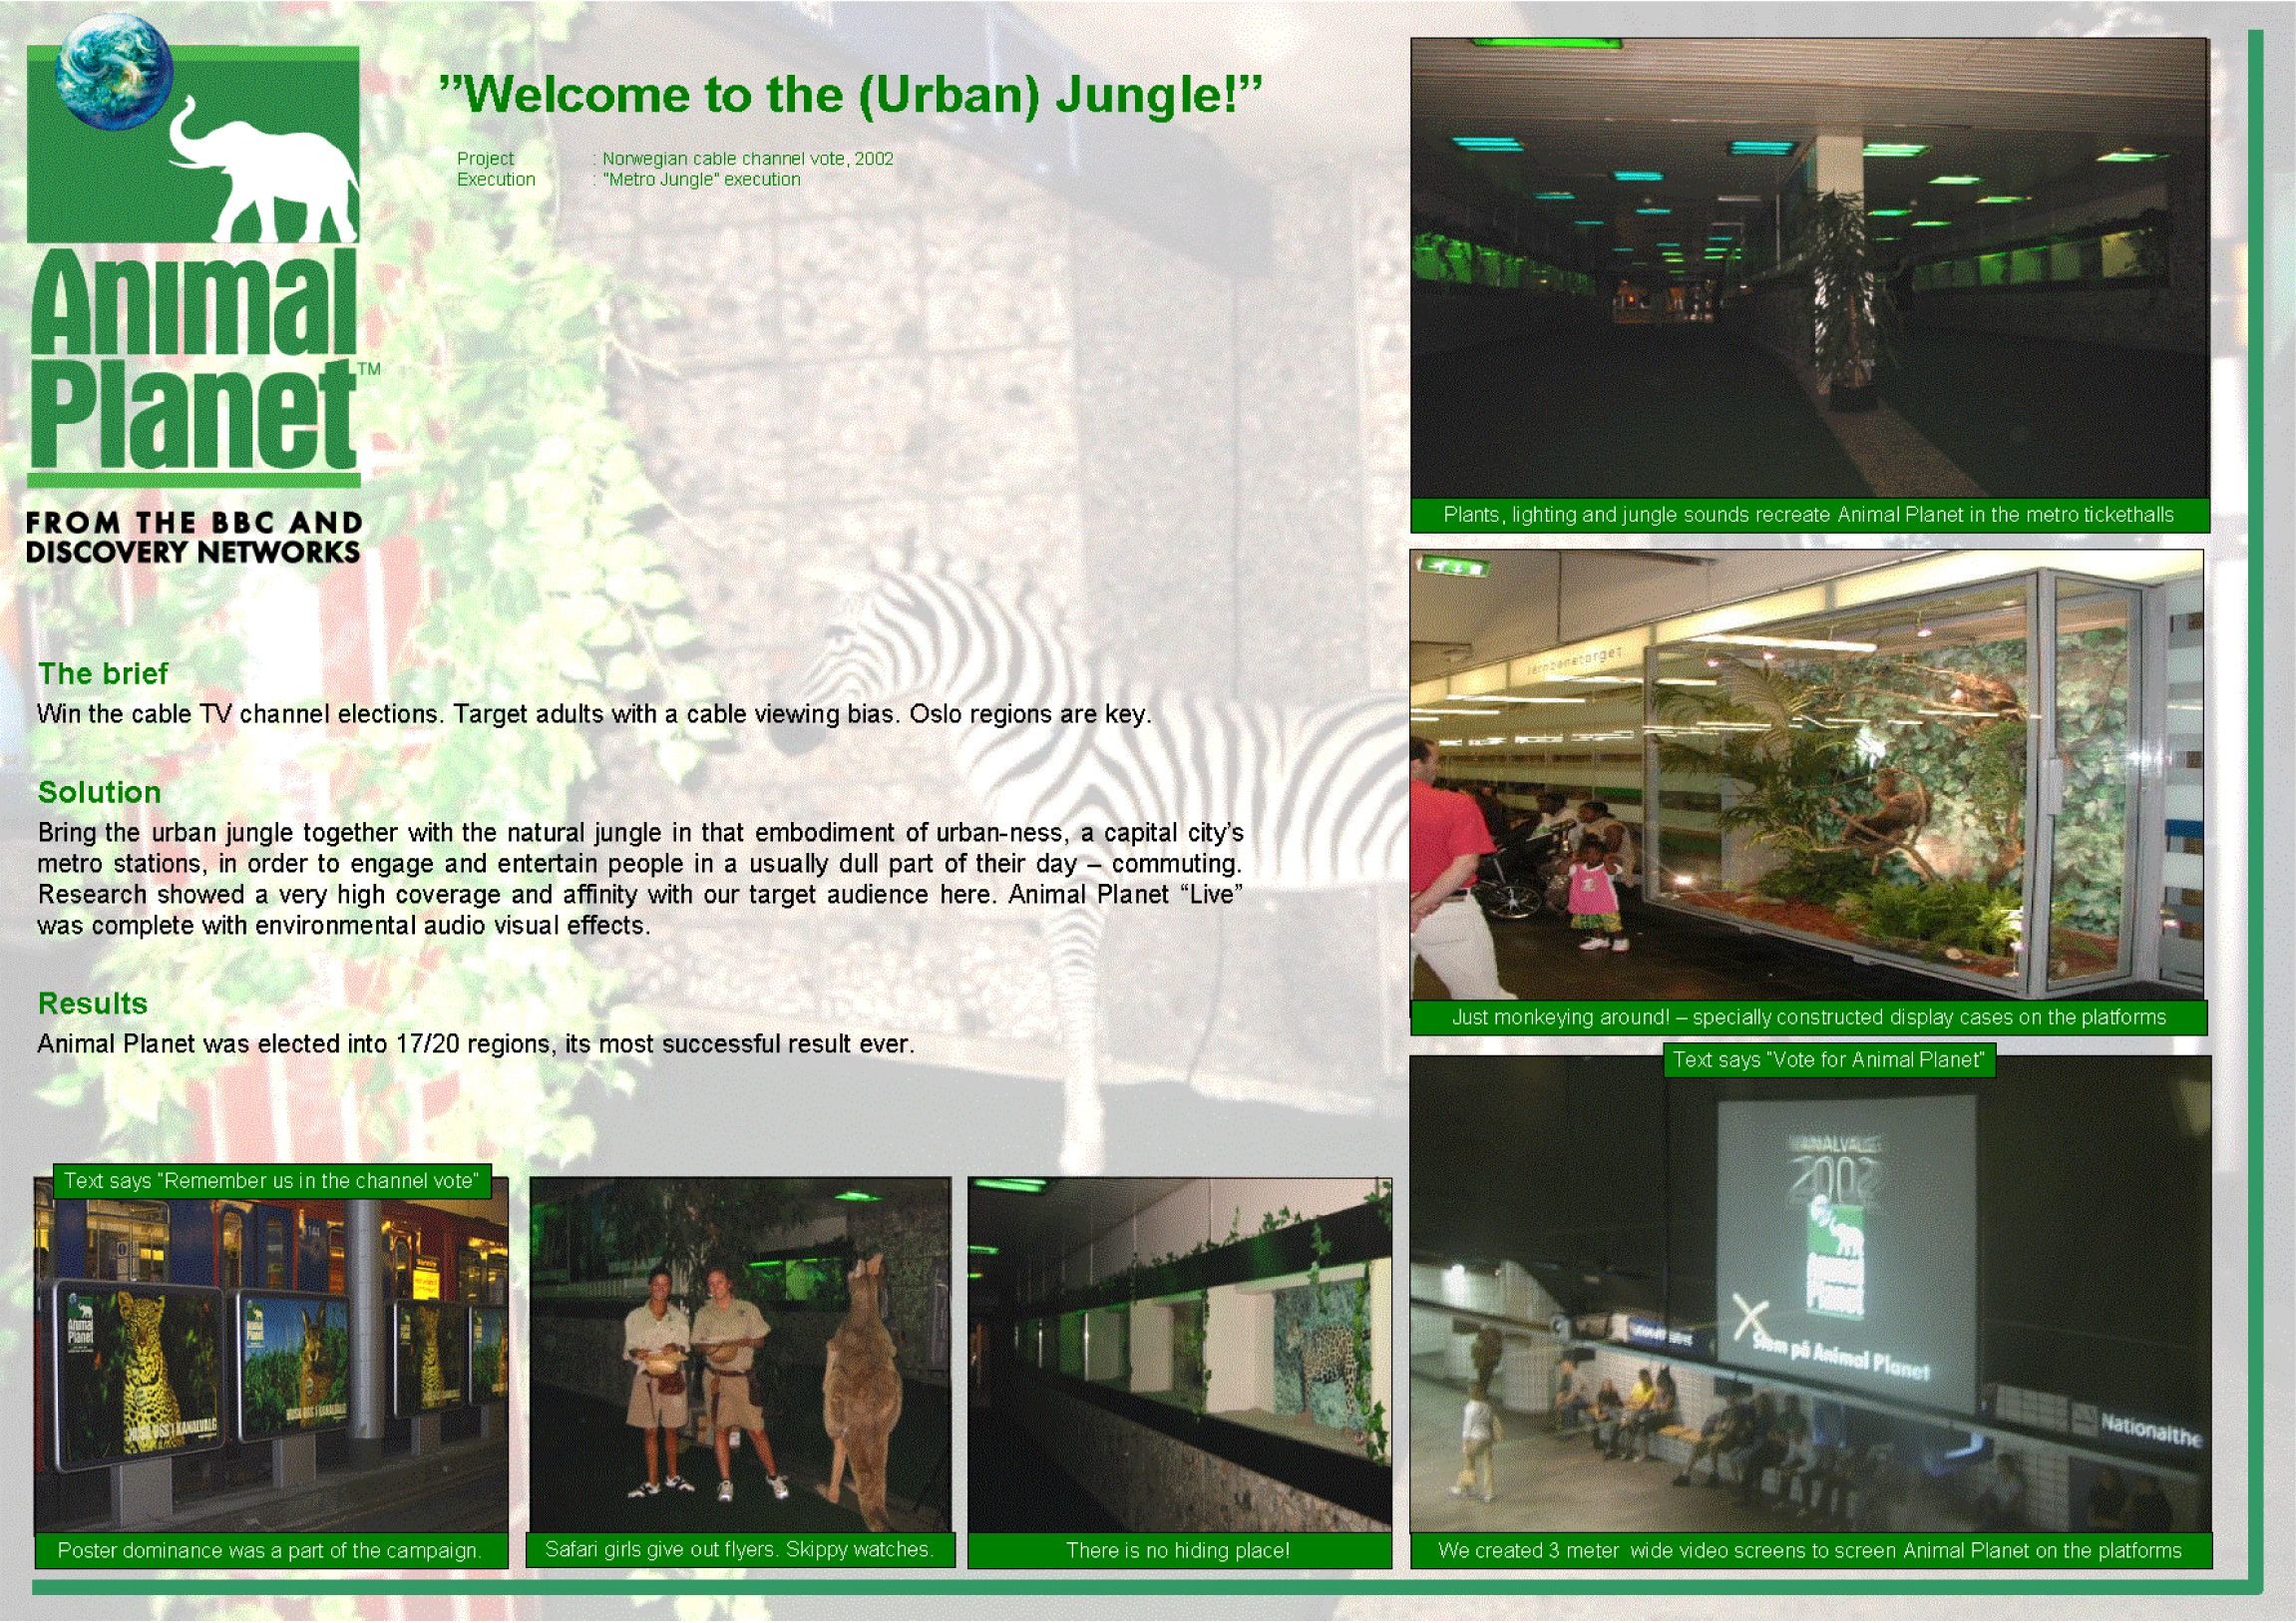 WELCOME TO THE (URBAN) JUNGLE!